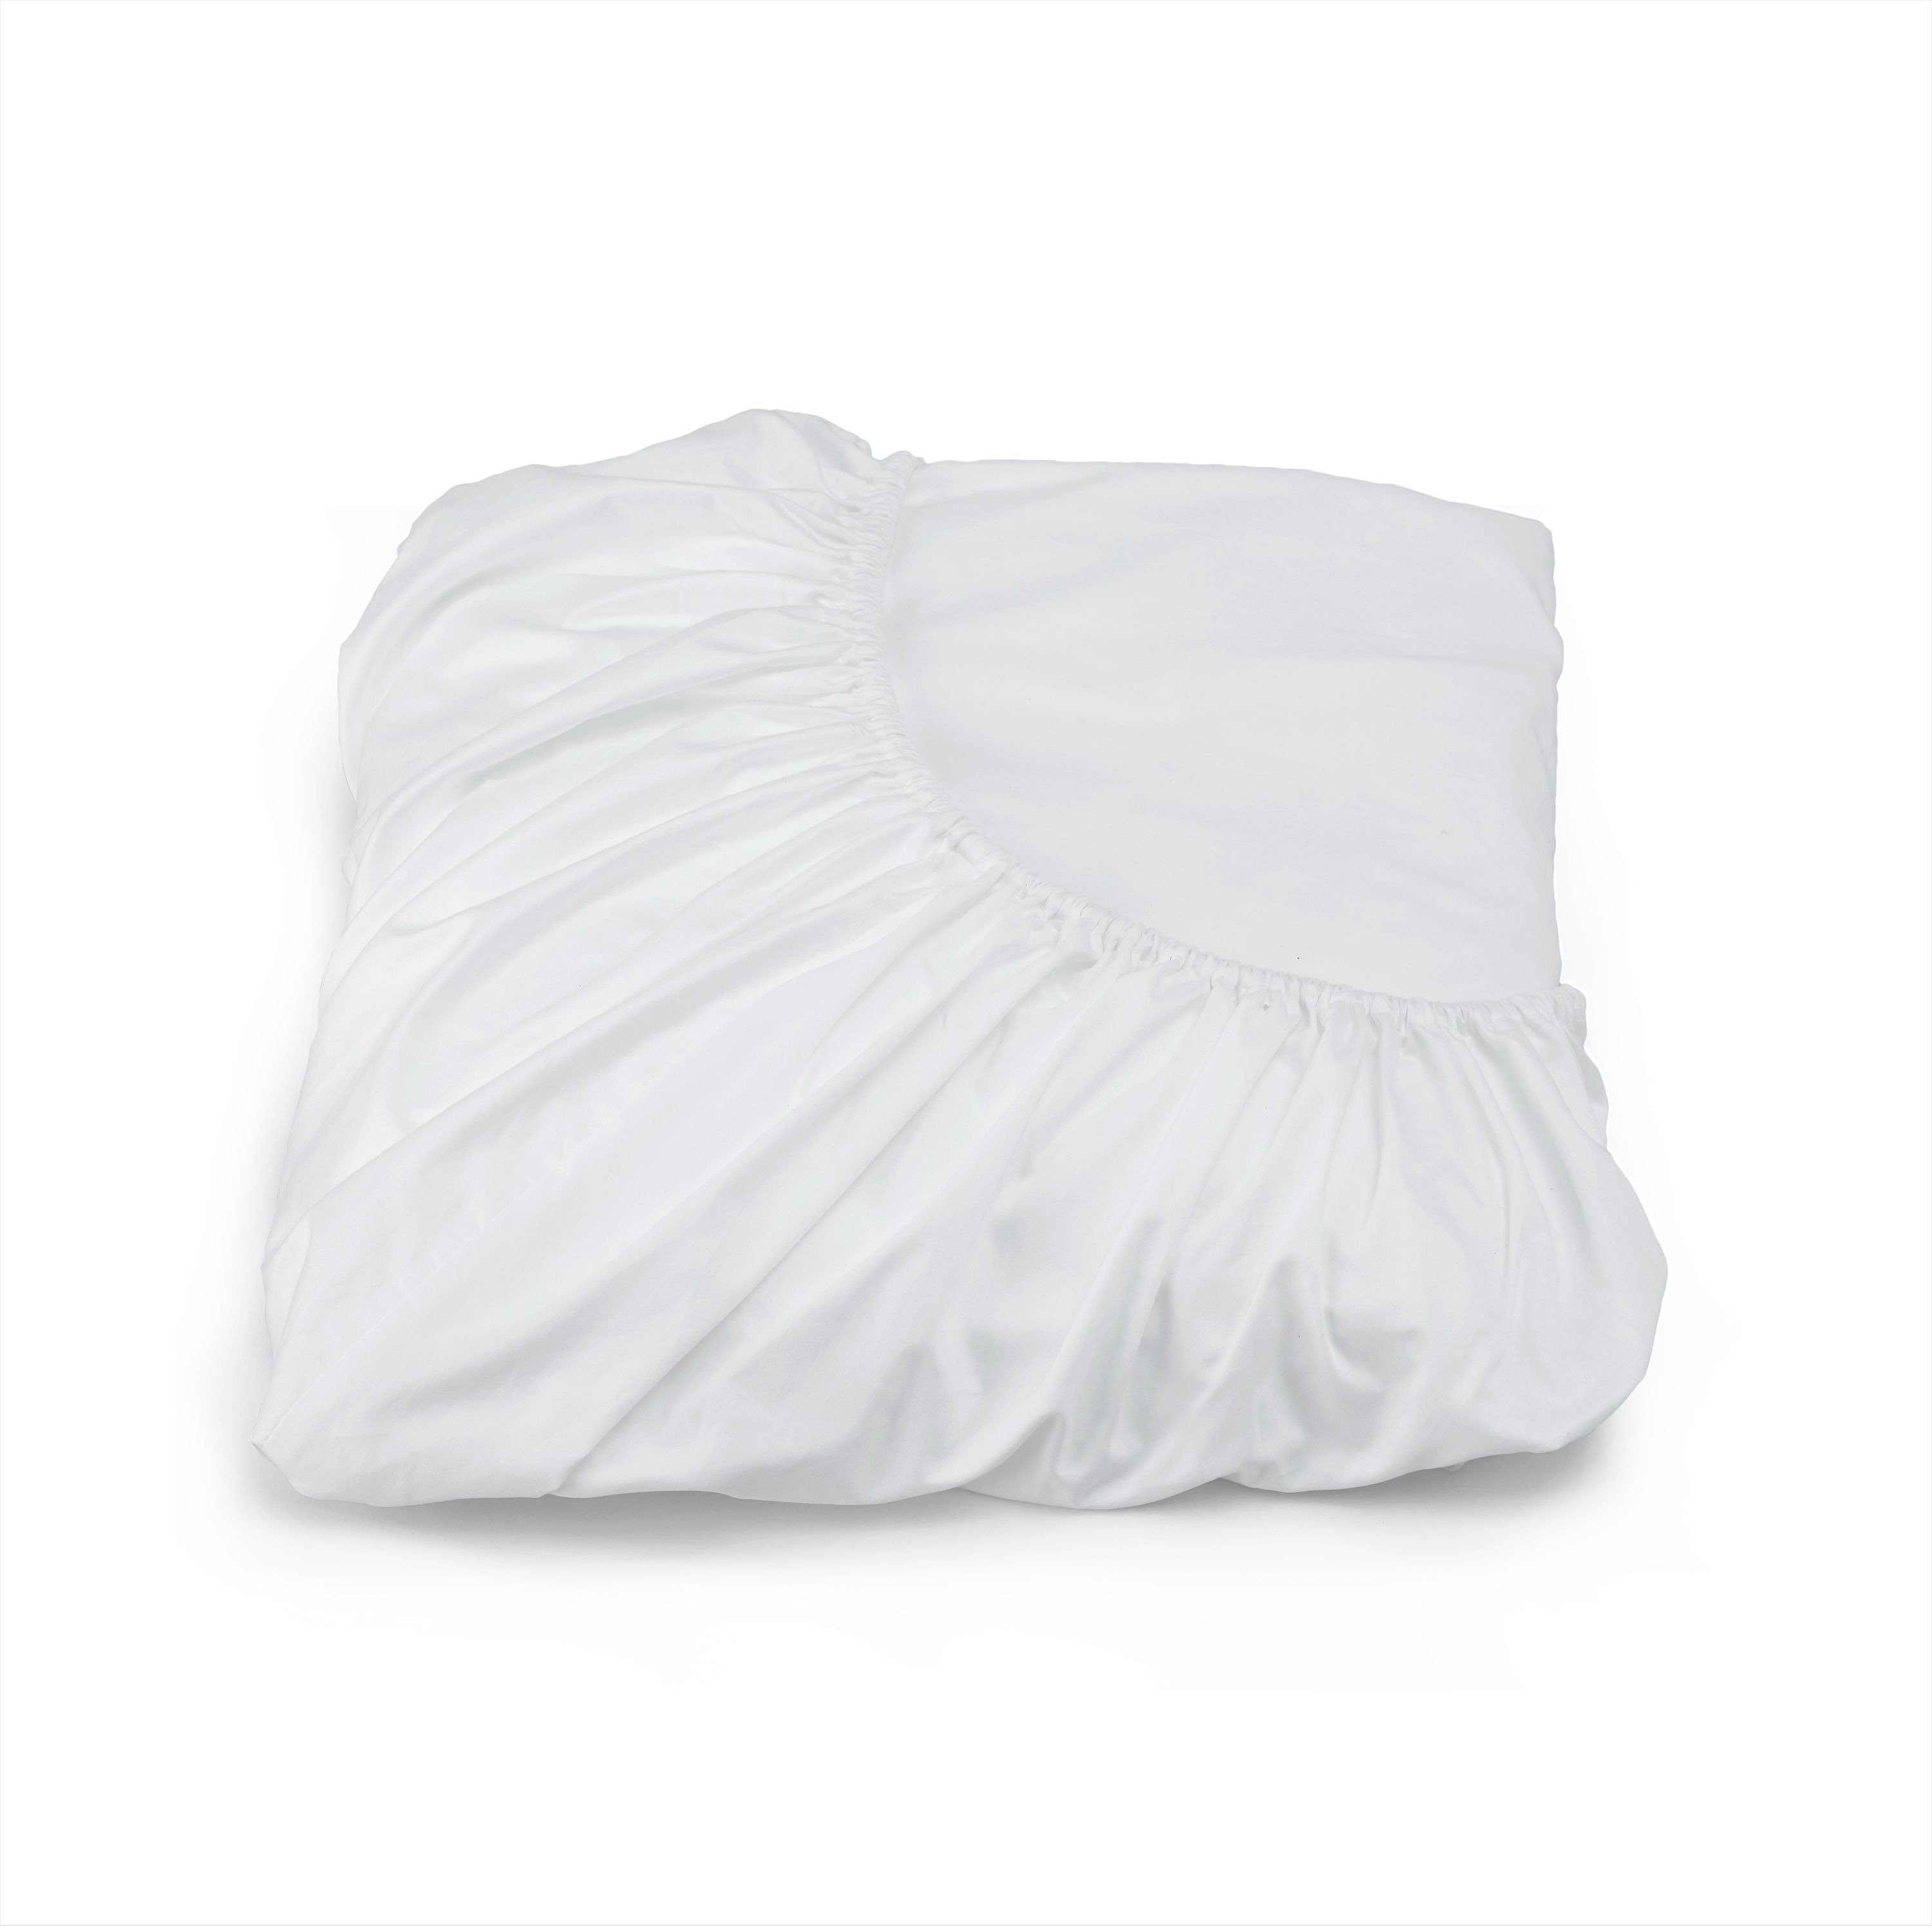 Hotel Collection Fitted Sheet - image 1